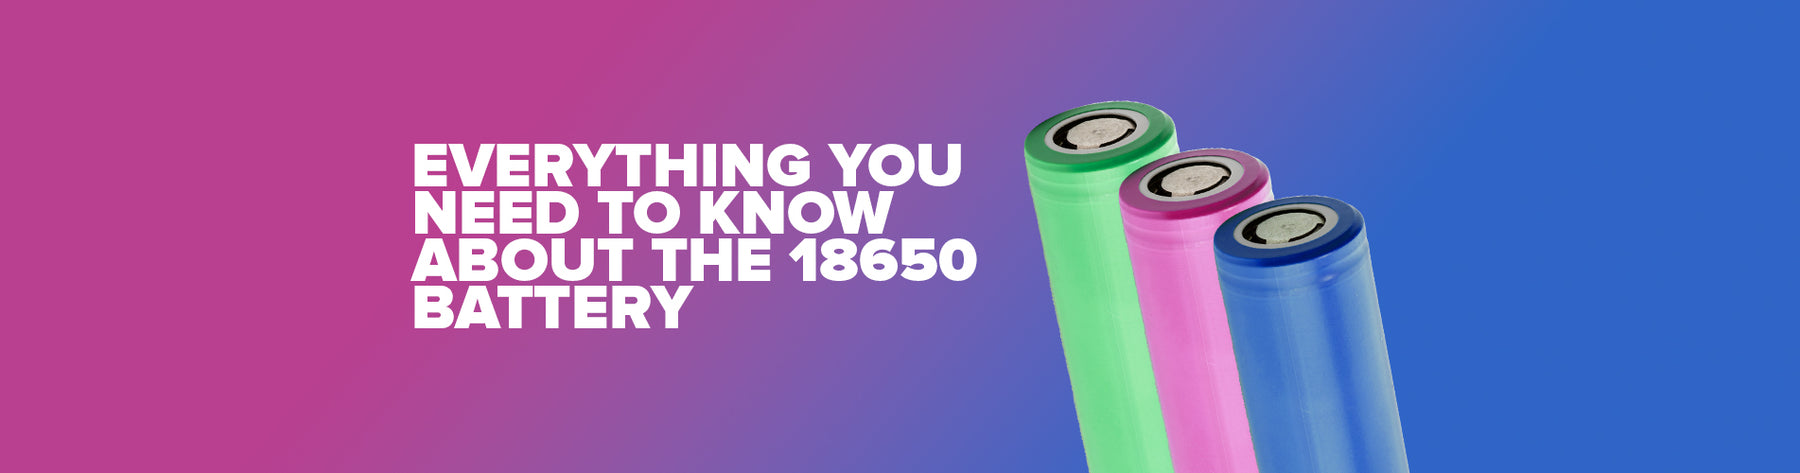 Everything You Need To Know About The 18650 Battery